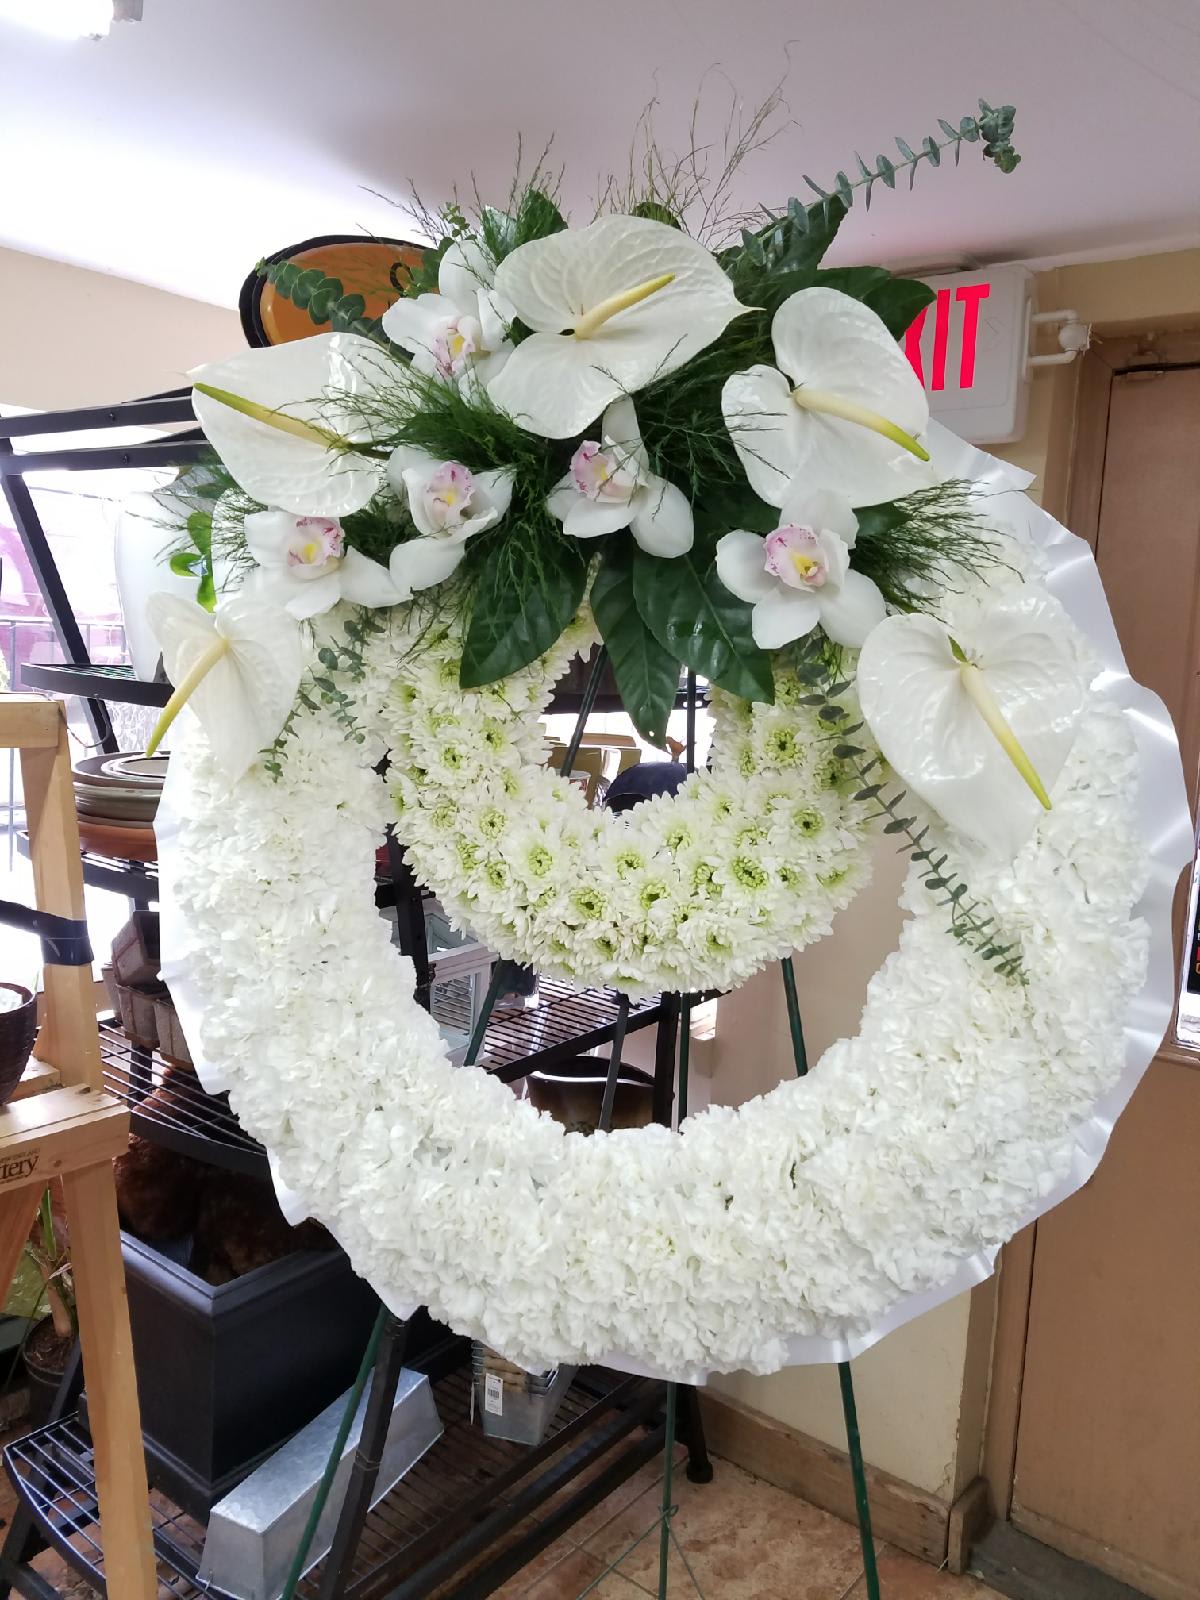 Ring Funeral Flowers Artificial Tribute Wreath Silk Grave Memorial Dad Son  Uncle | eBay